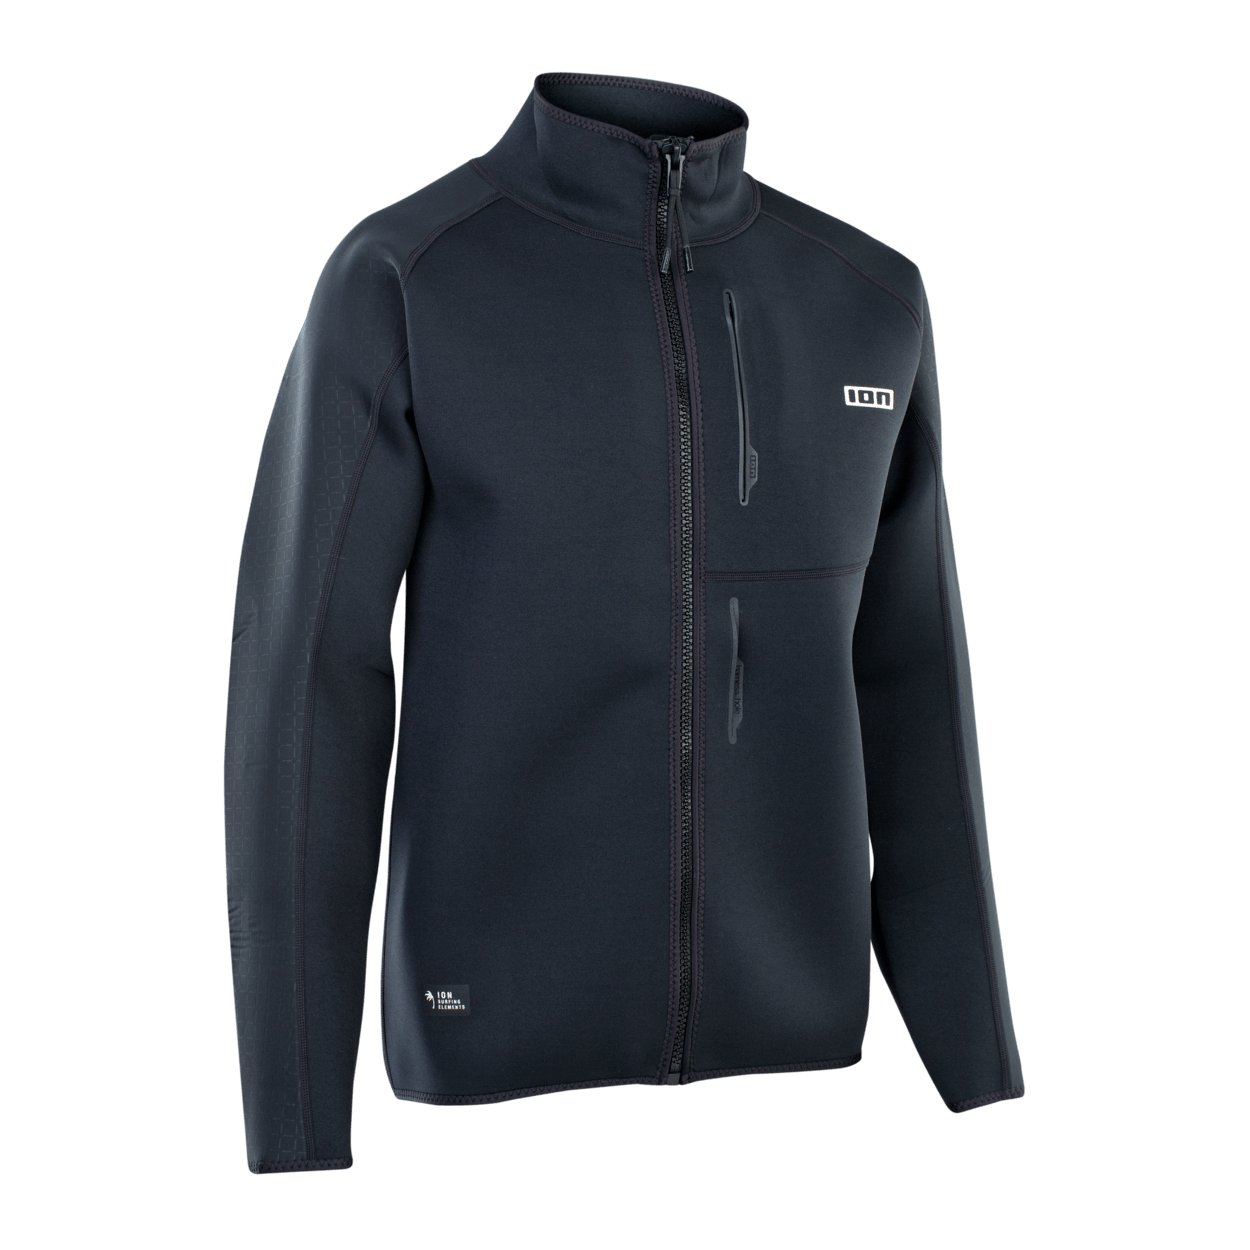 ION Men Neo Cruise Jacket 2023 - Worthing Watersports - 9010583052830 - Tops - ION Water